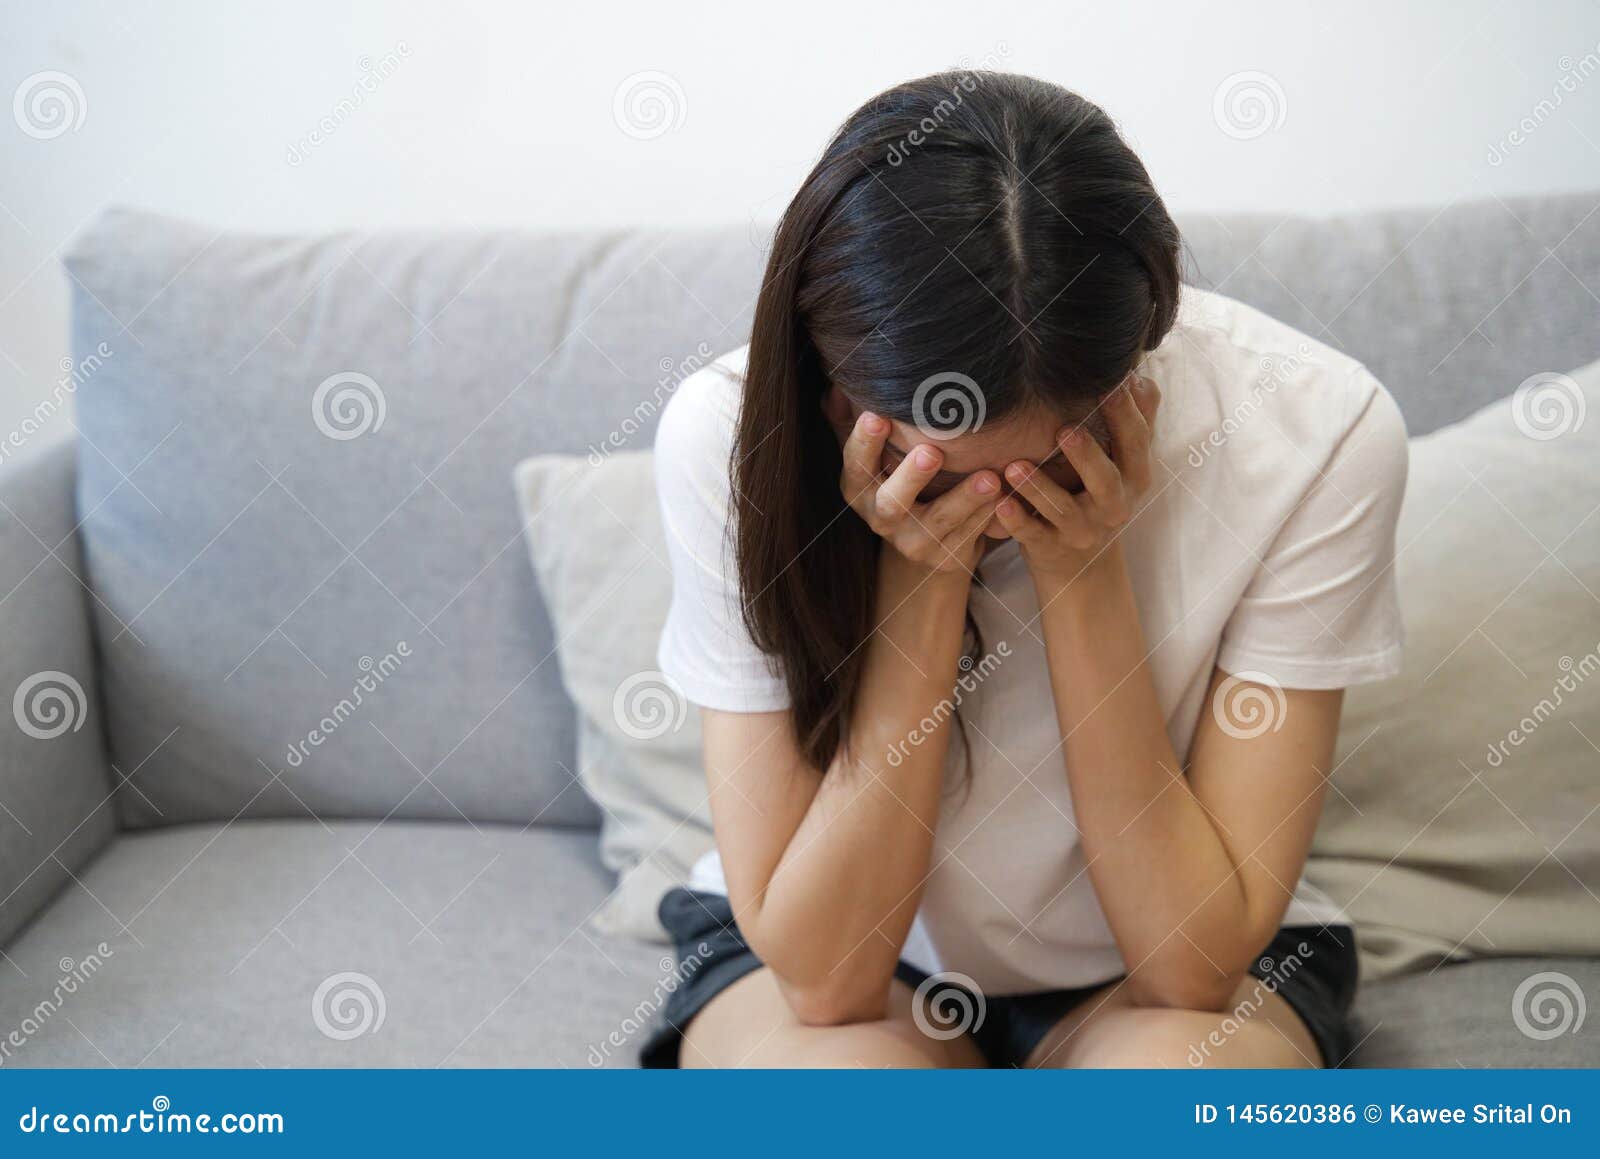 Hands on Temples of Young Disappointed Sadness Asian Girl Sitting ...